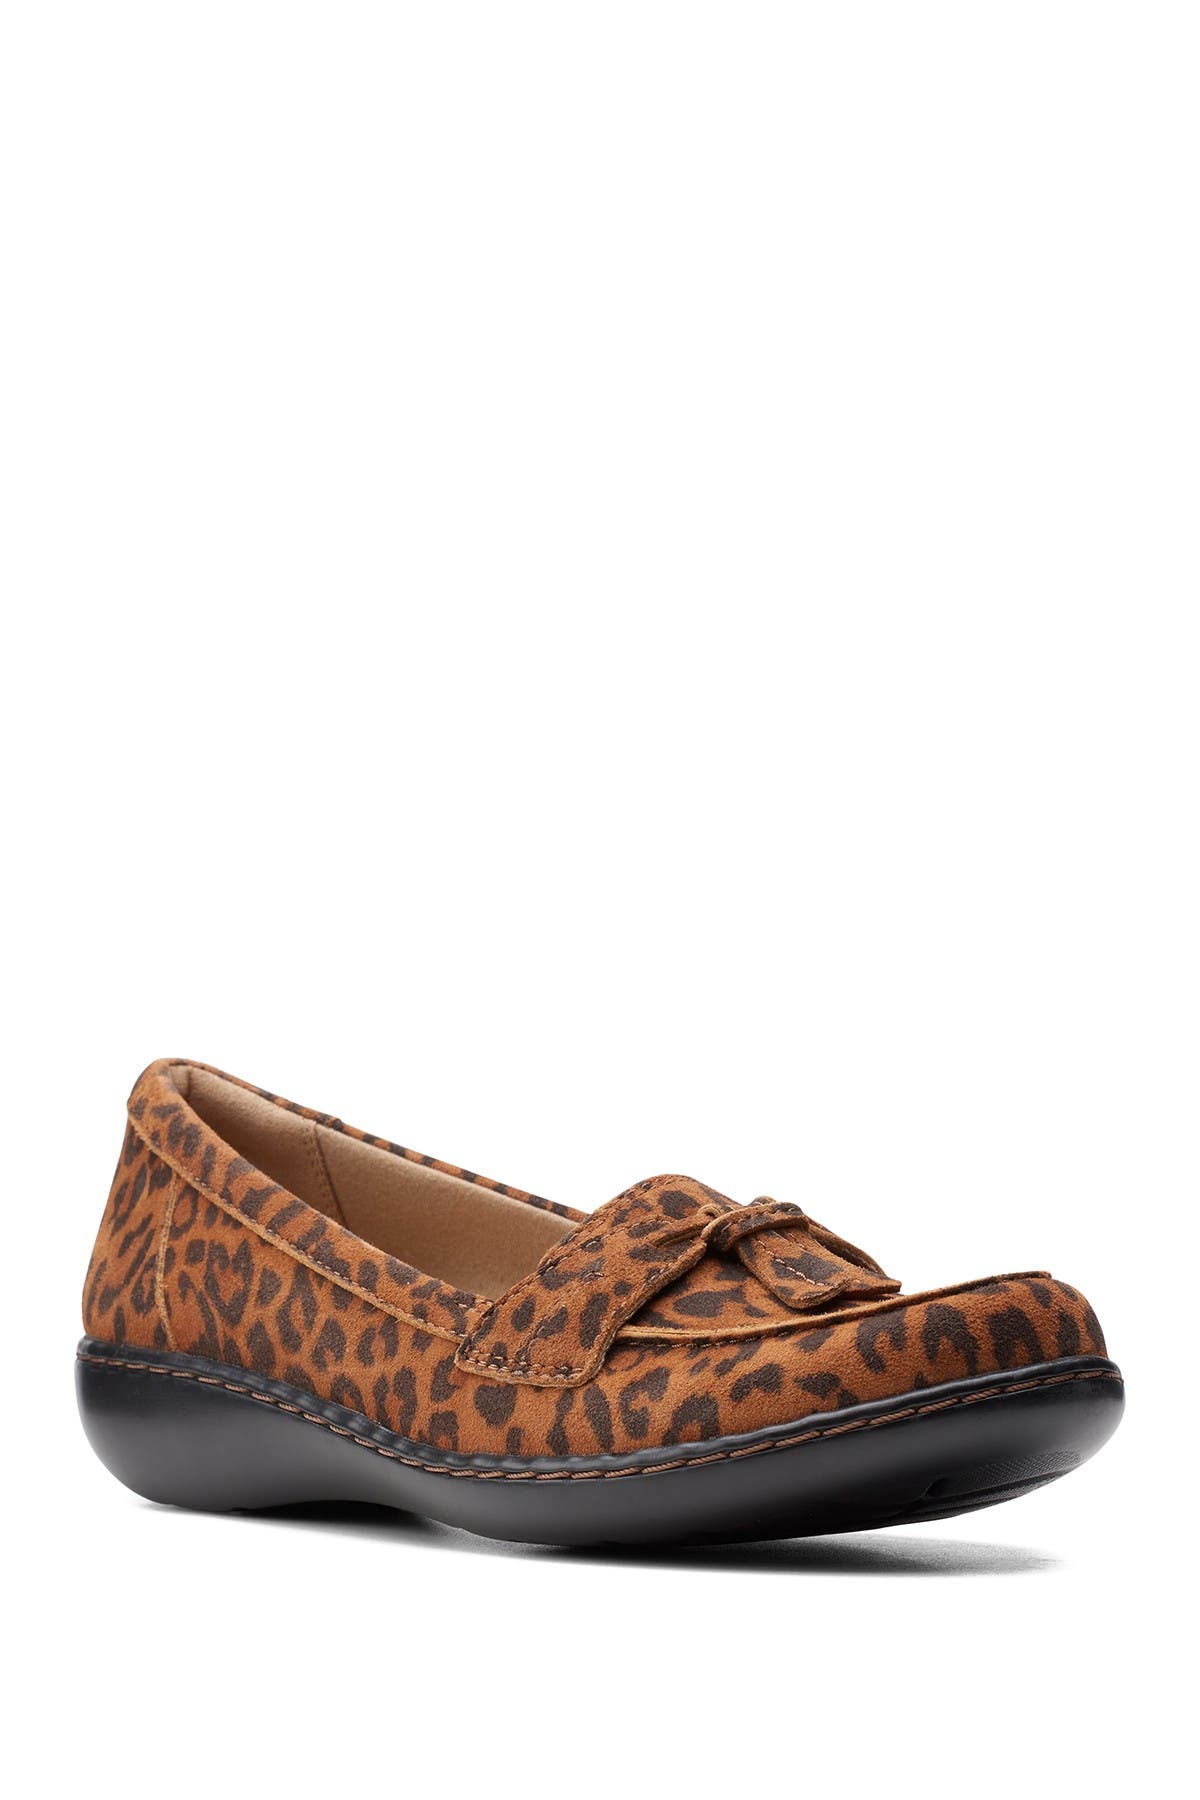 AD Template Size Clarks Women's Ashland Bubble Loafer